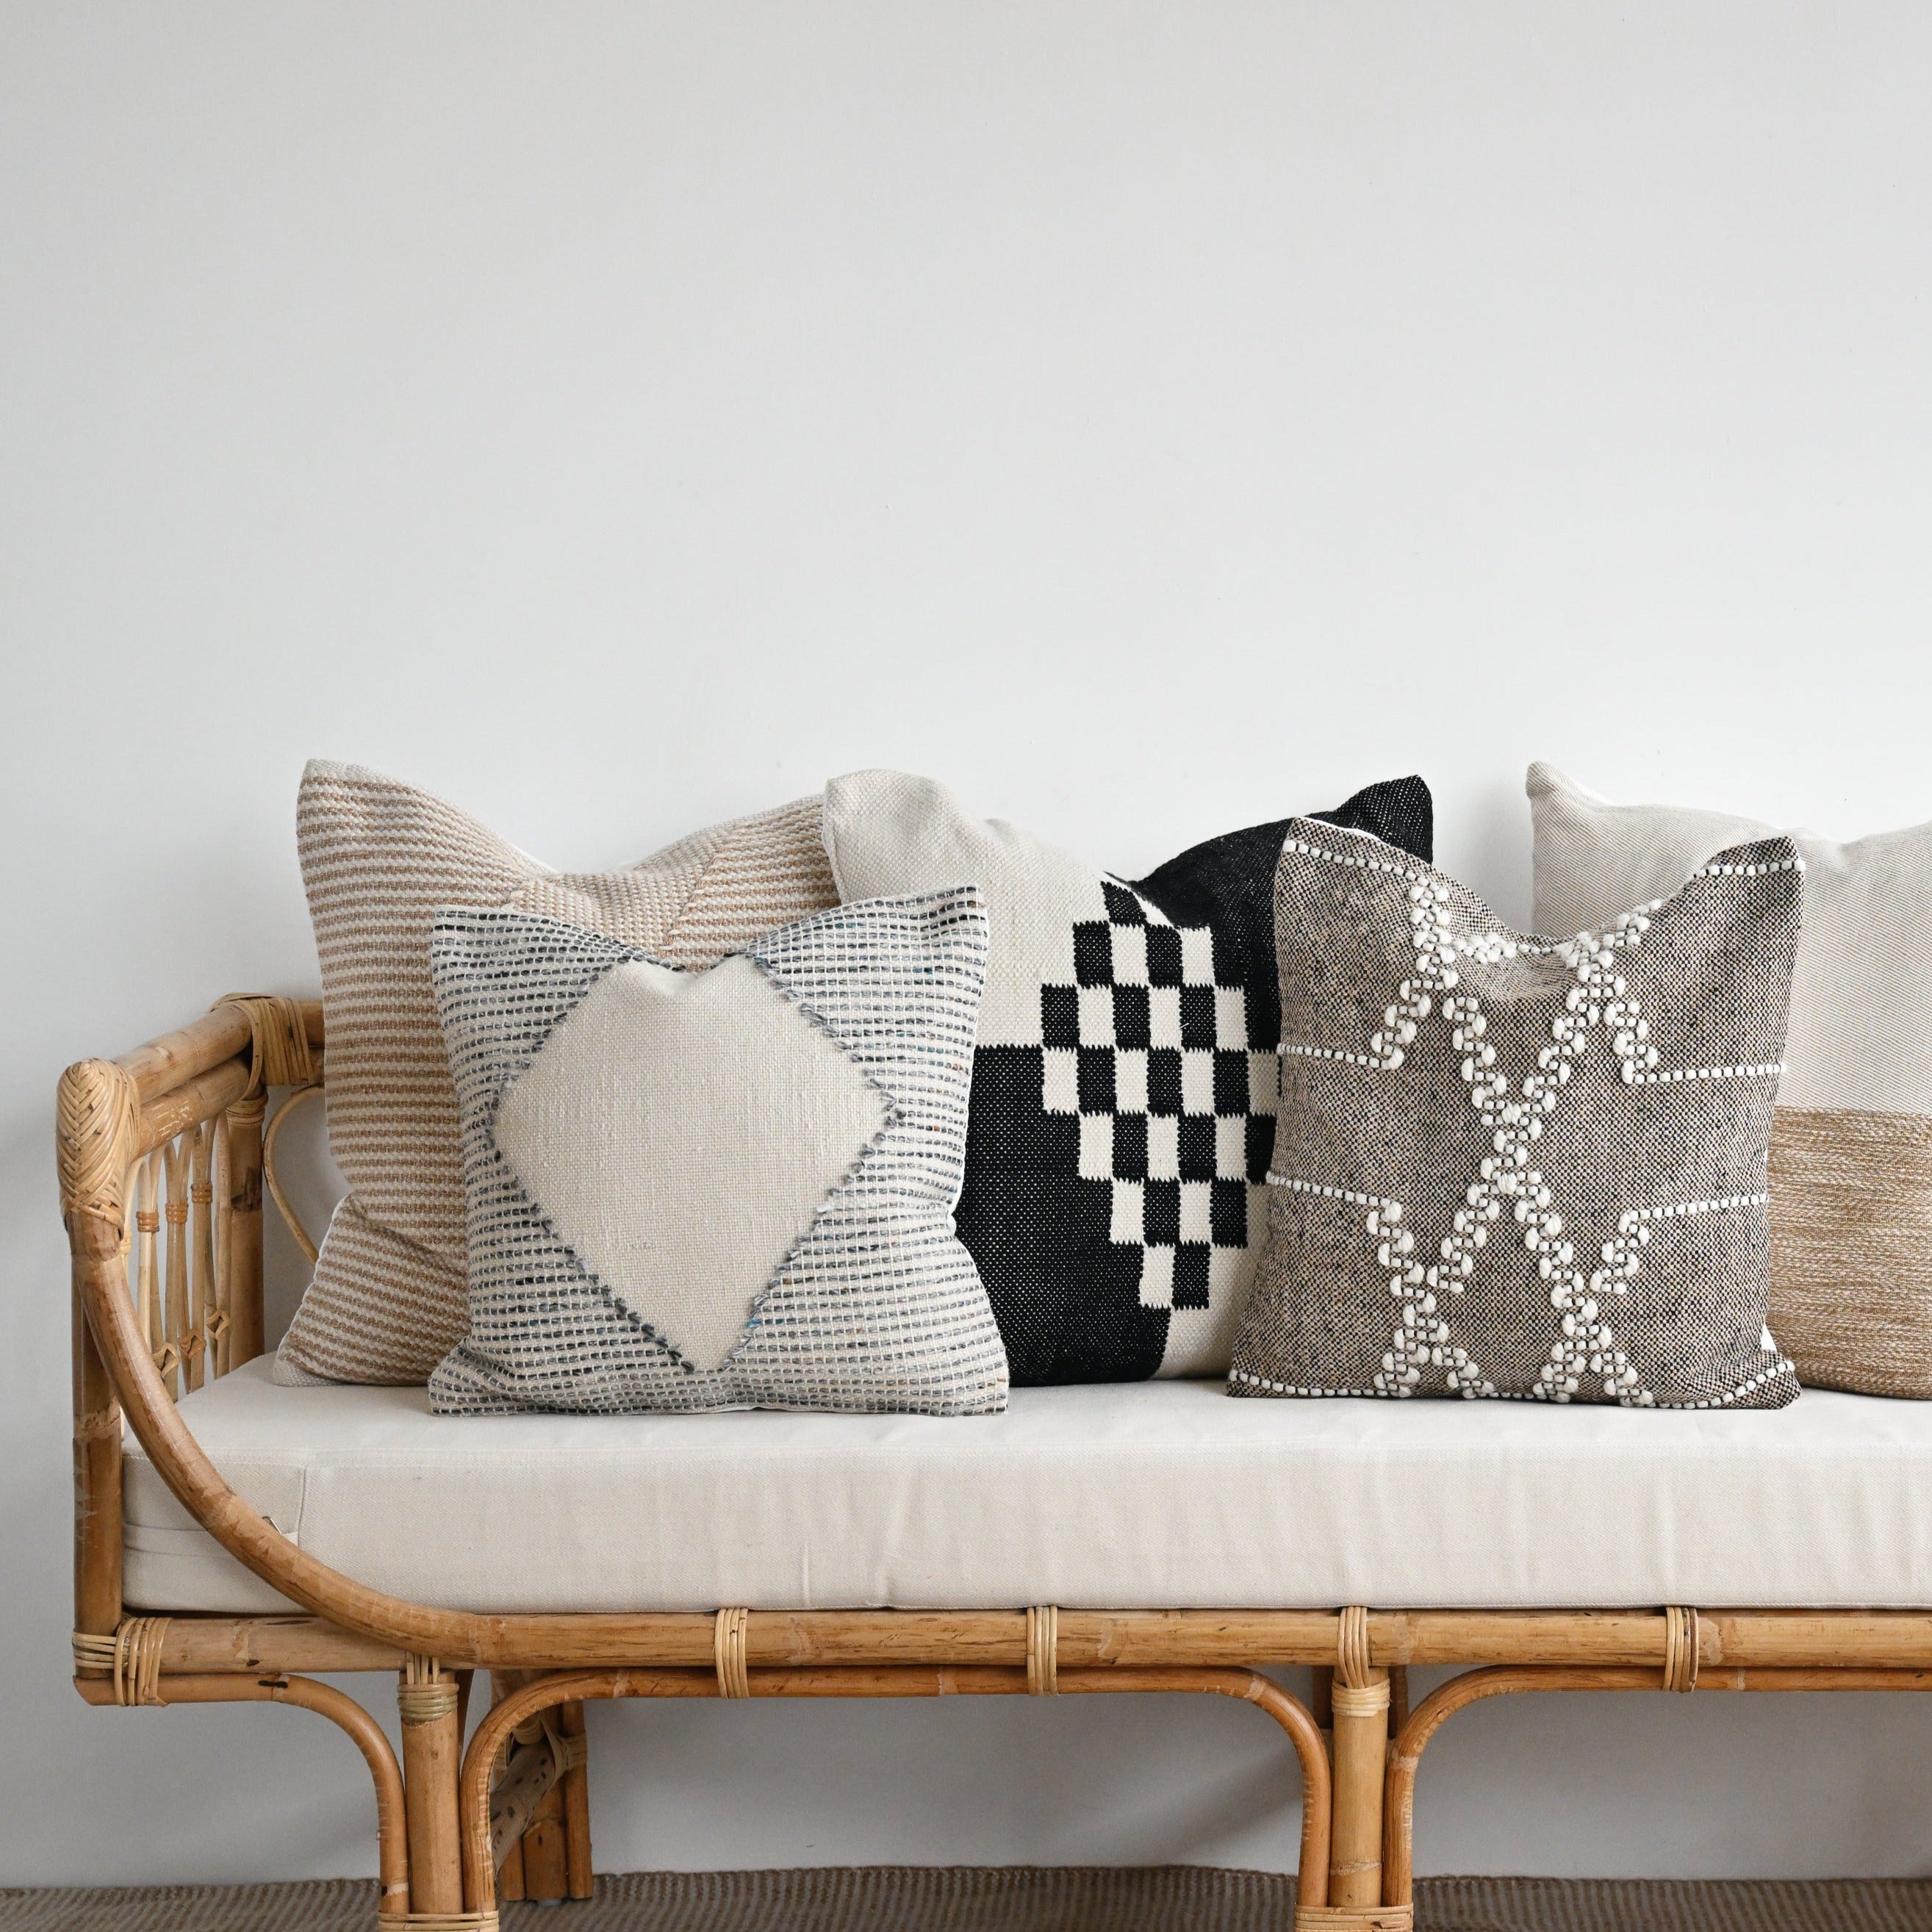 Checkered Indoor Outdoor Handwoven Cushion Cover - 55cm x 55cm